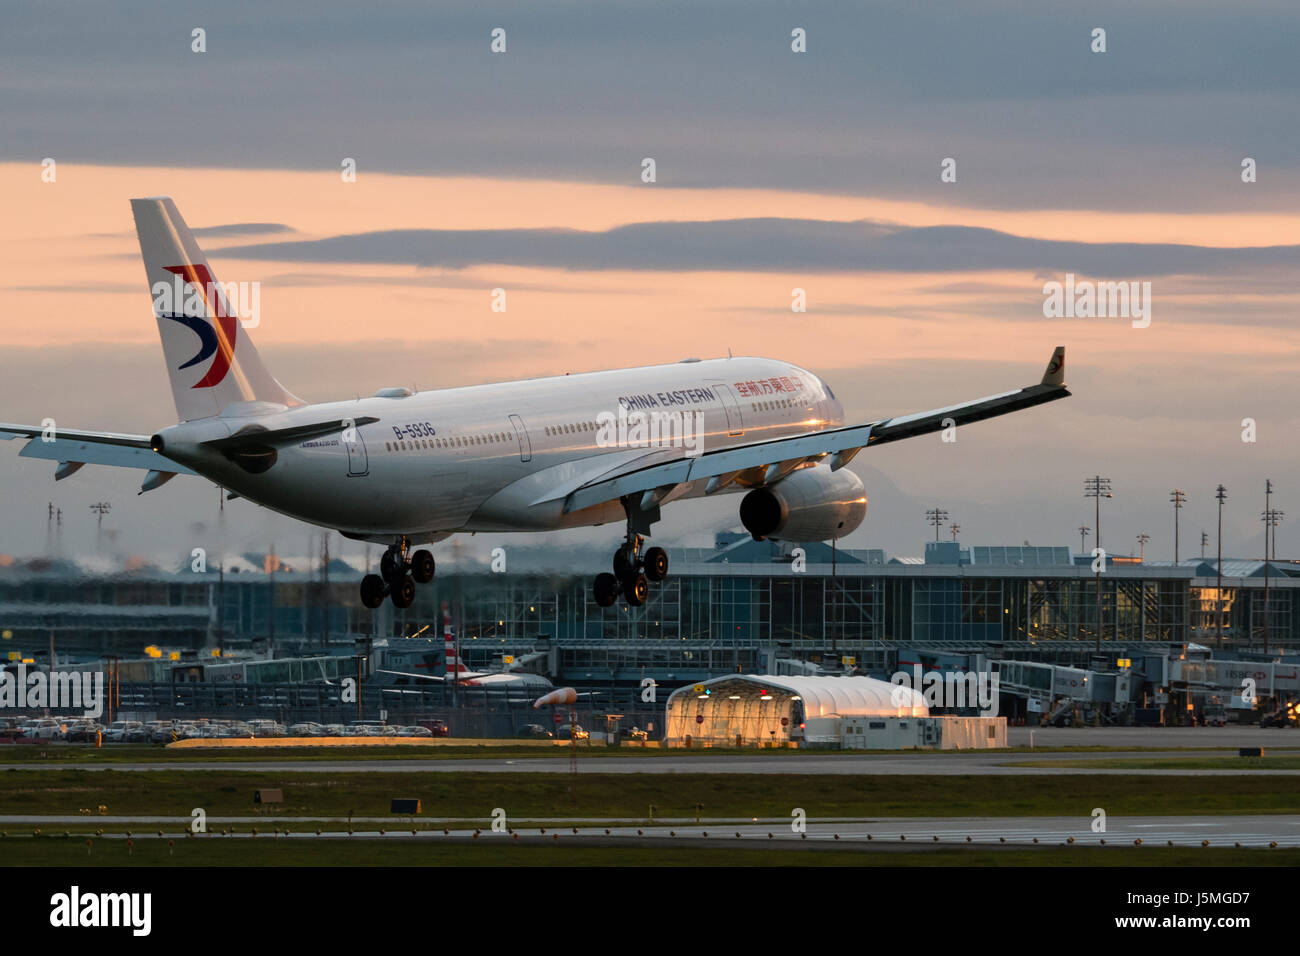 China Eastern Airlines plane airplane landing Vancouver International Airport terminal exterior dusk twilight view Airbus A330 jetliner B-5936 Stock Photo